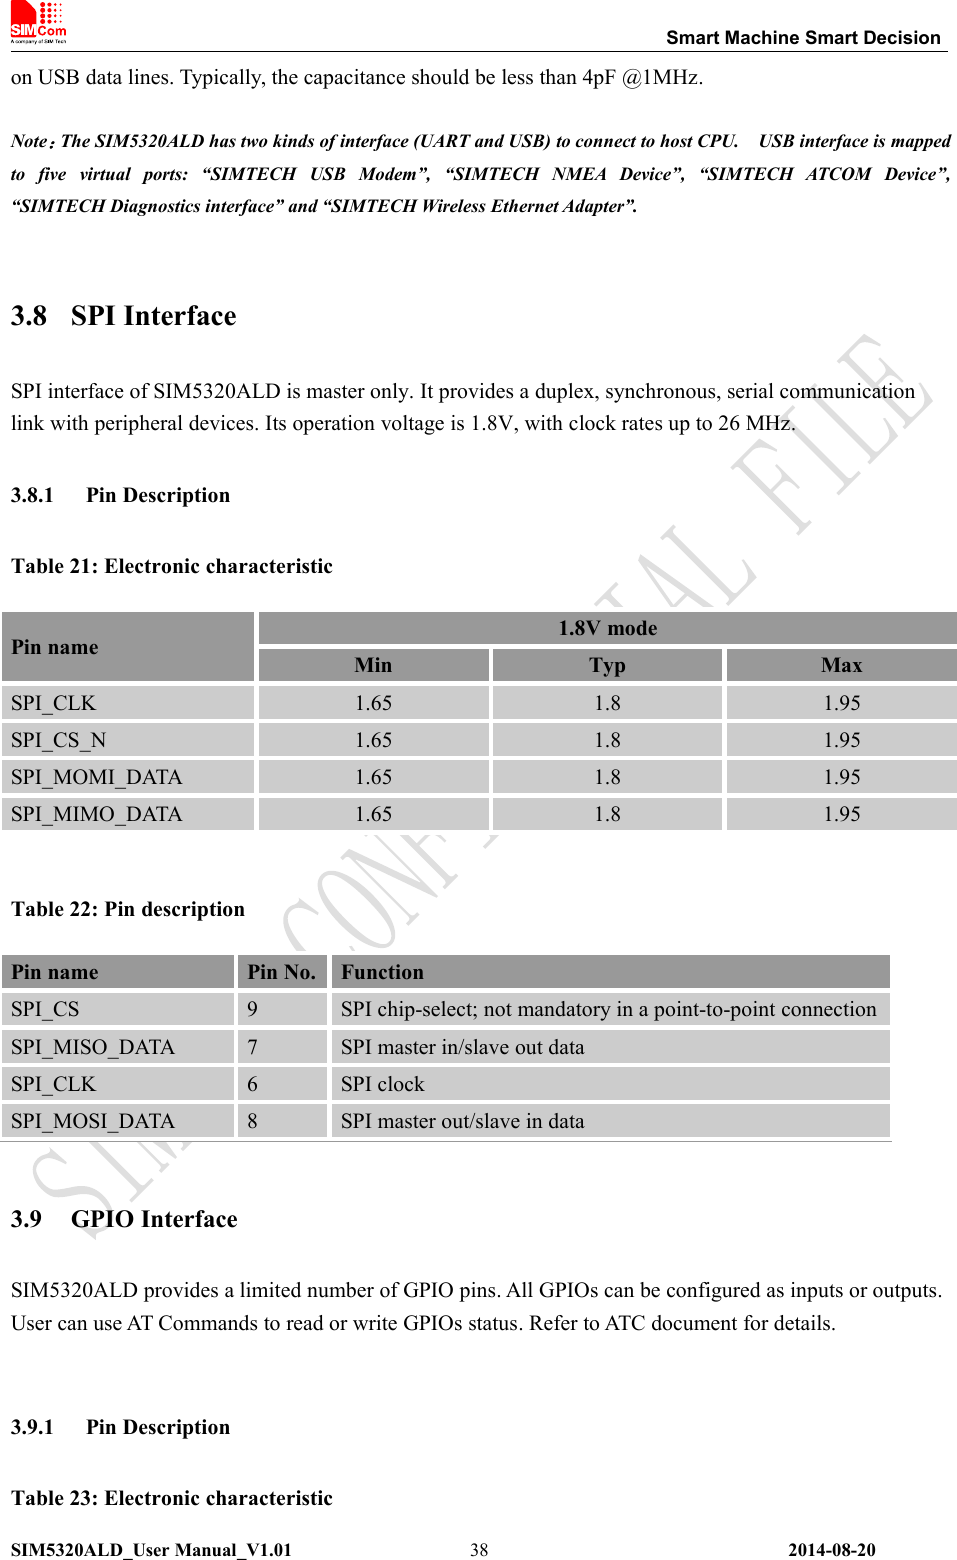 Smart Machine Smart DecisionSIM5320ALD_User Manual_V1.01 2014-08-2038on USB data lines. Typically, the capacitance should be less than 4pF @1MHz.Note：The SIM5320ALD has two kinds of interface (UART and USB) to connect to host CPU. USB interface is mappedto five virtual ports: “SIMTECH USB Modem”, “SIMTECH NMEA Device”, “SIMTECH ATCOM Device”,“SIMTECH Diagnostics interface” and “SIMTECH Wireless Ethernet Adapter”.3.8 SPI InterfaceSPI interface of SIM5320ALD is master only. It provides a duplex, synchronous, serial communicationlink with peripheral devices. Its operation voltage is 1.8V, with clock rates up to 26 MHz.3.8.1 Pin DescriptionTable 21: Electronic characteristicPin name 1.8V modeMin Typ MaxSPI_CLK 1.65 1.8 1.95SPI_CS_N 1.65 1.8 1.95SPI_MOMI_DATA 1.65 1.8 1.95SPI_MIMO_DATA 1.65 1.8 1.95Table 22: Pin description3.9 GPIO InterfaceSIM5320ALD provides a limited number of GPIO pins. All GPIOs can be configured as inputs or outputs.User can use AT Commands to read or write GPIOs status. Refer to ATC document for details.3.9.1 Pin DescriptionTable 23: Electronic characteristicPin name Pin No. FunctionSPI_CS 9 SPI chip-select; not mandatory in a point-to-point connectionSPI_MISO_DATA 7 SPI master in/slave out dataSPI_CLK 6 SPI clockSPI_MOSI_DATA 8 SPI master out/slave in data